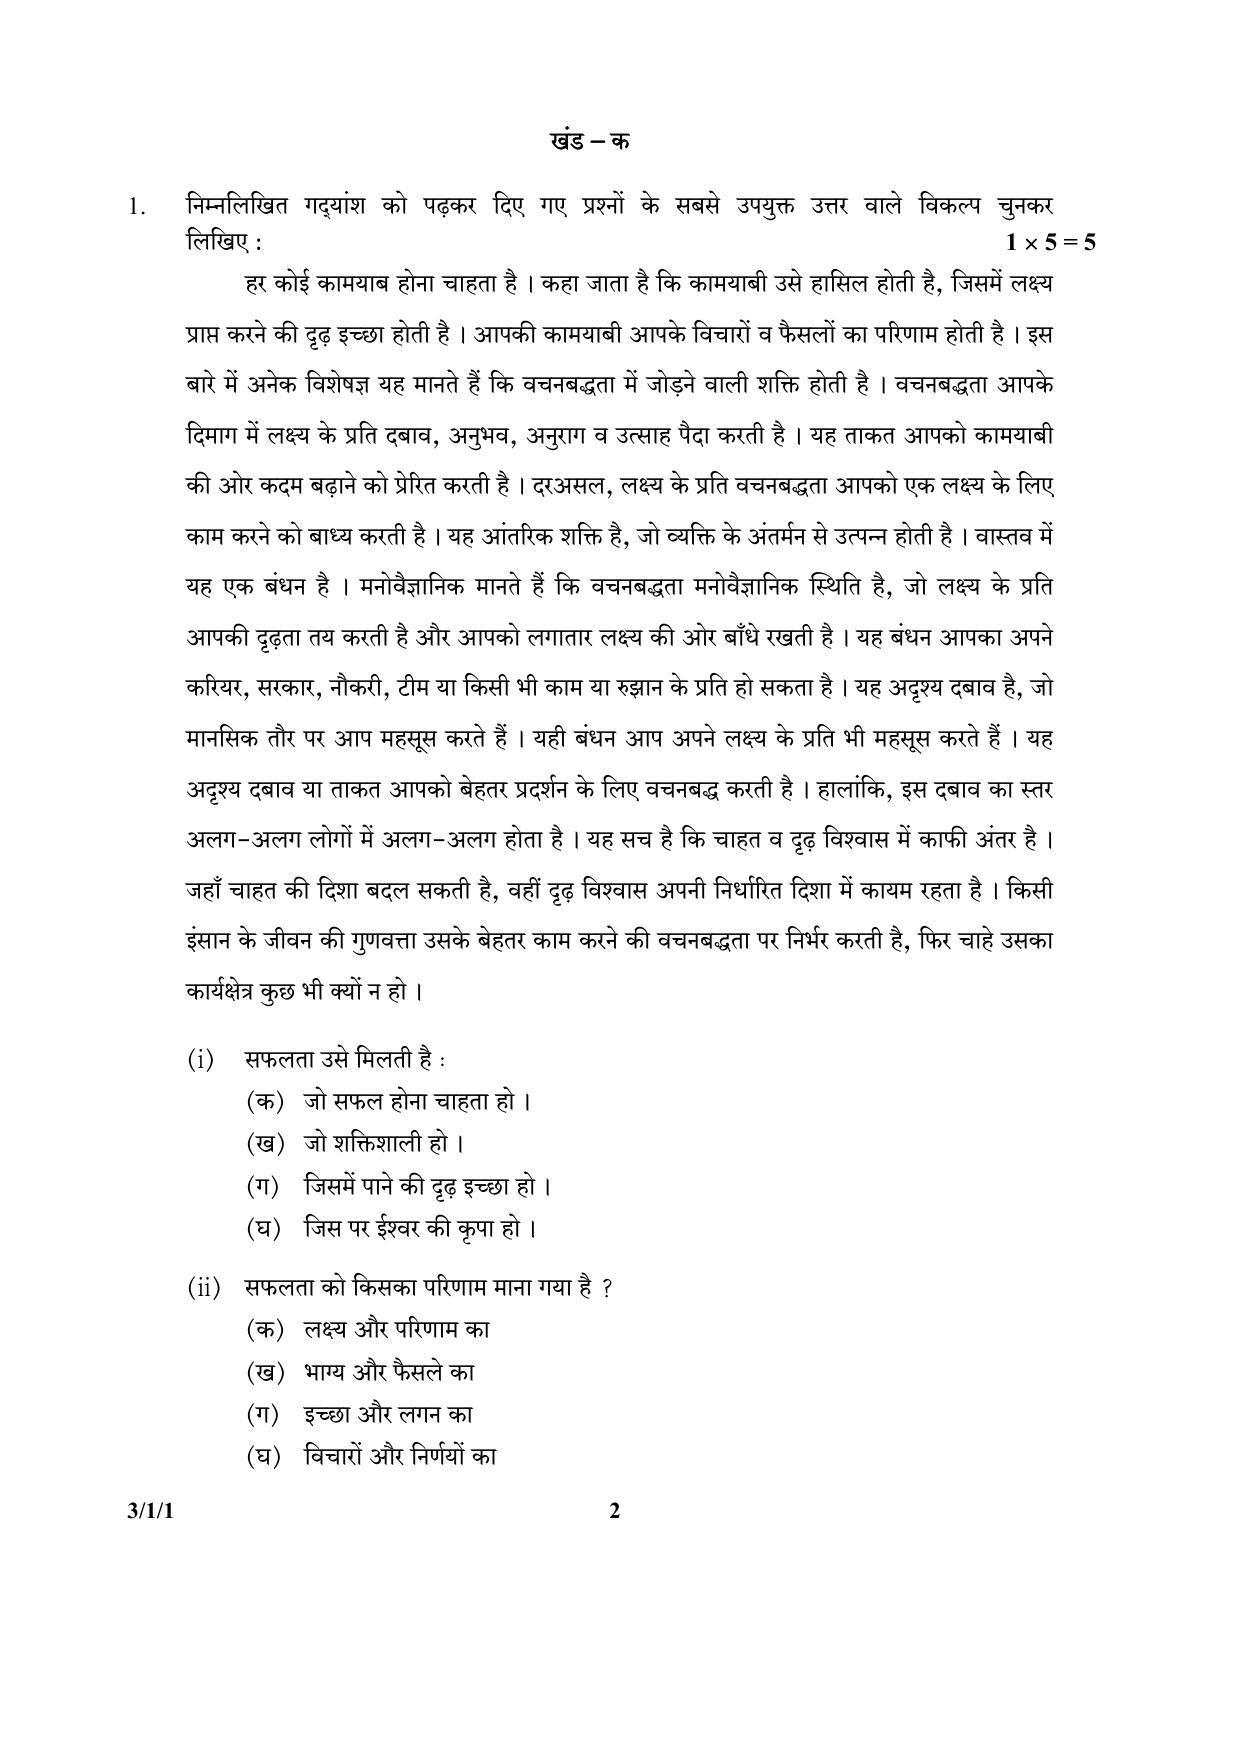 CBSE Class 10 3-1-1 (Hindi) 2017-comptt Question Paper - Page 2